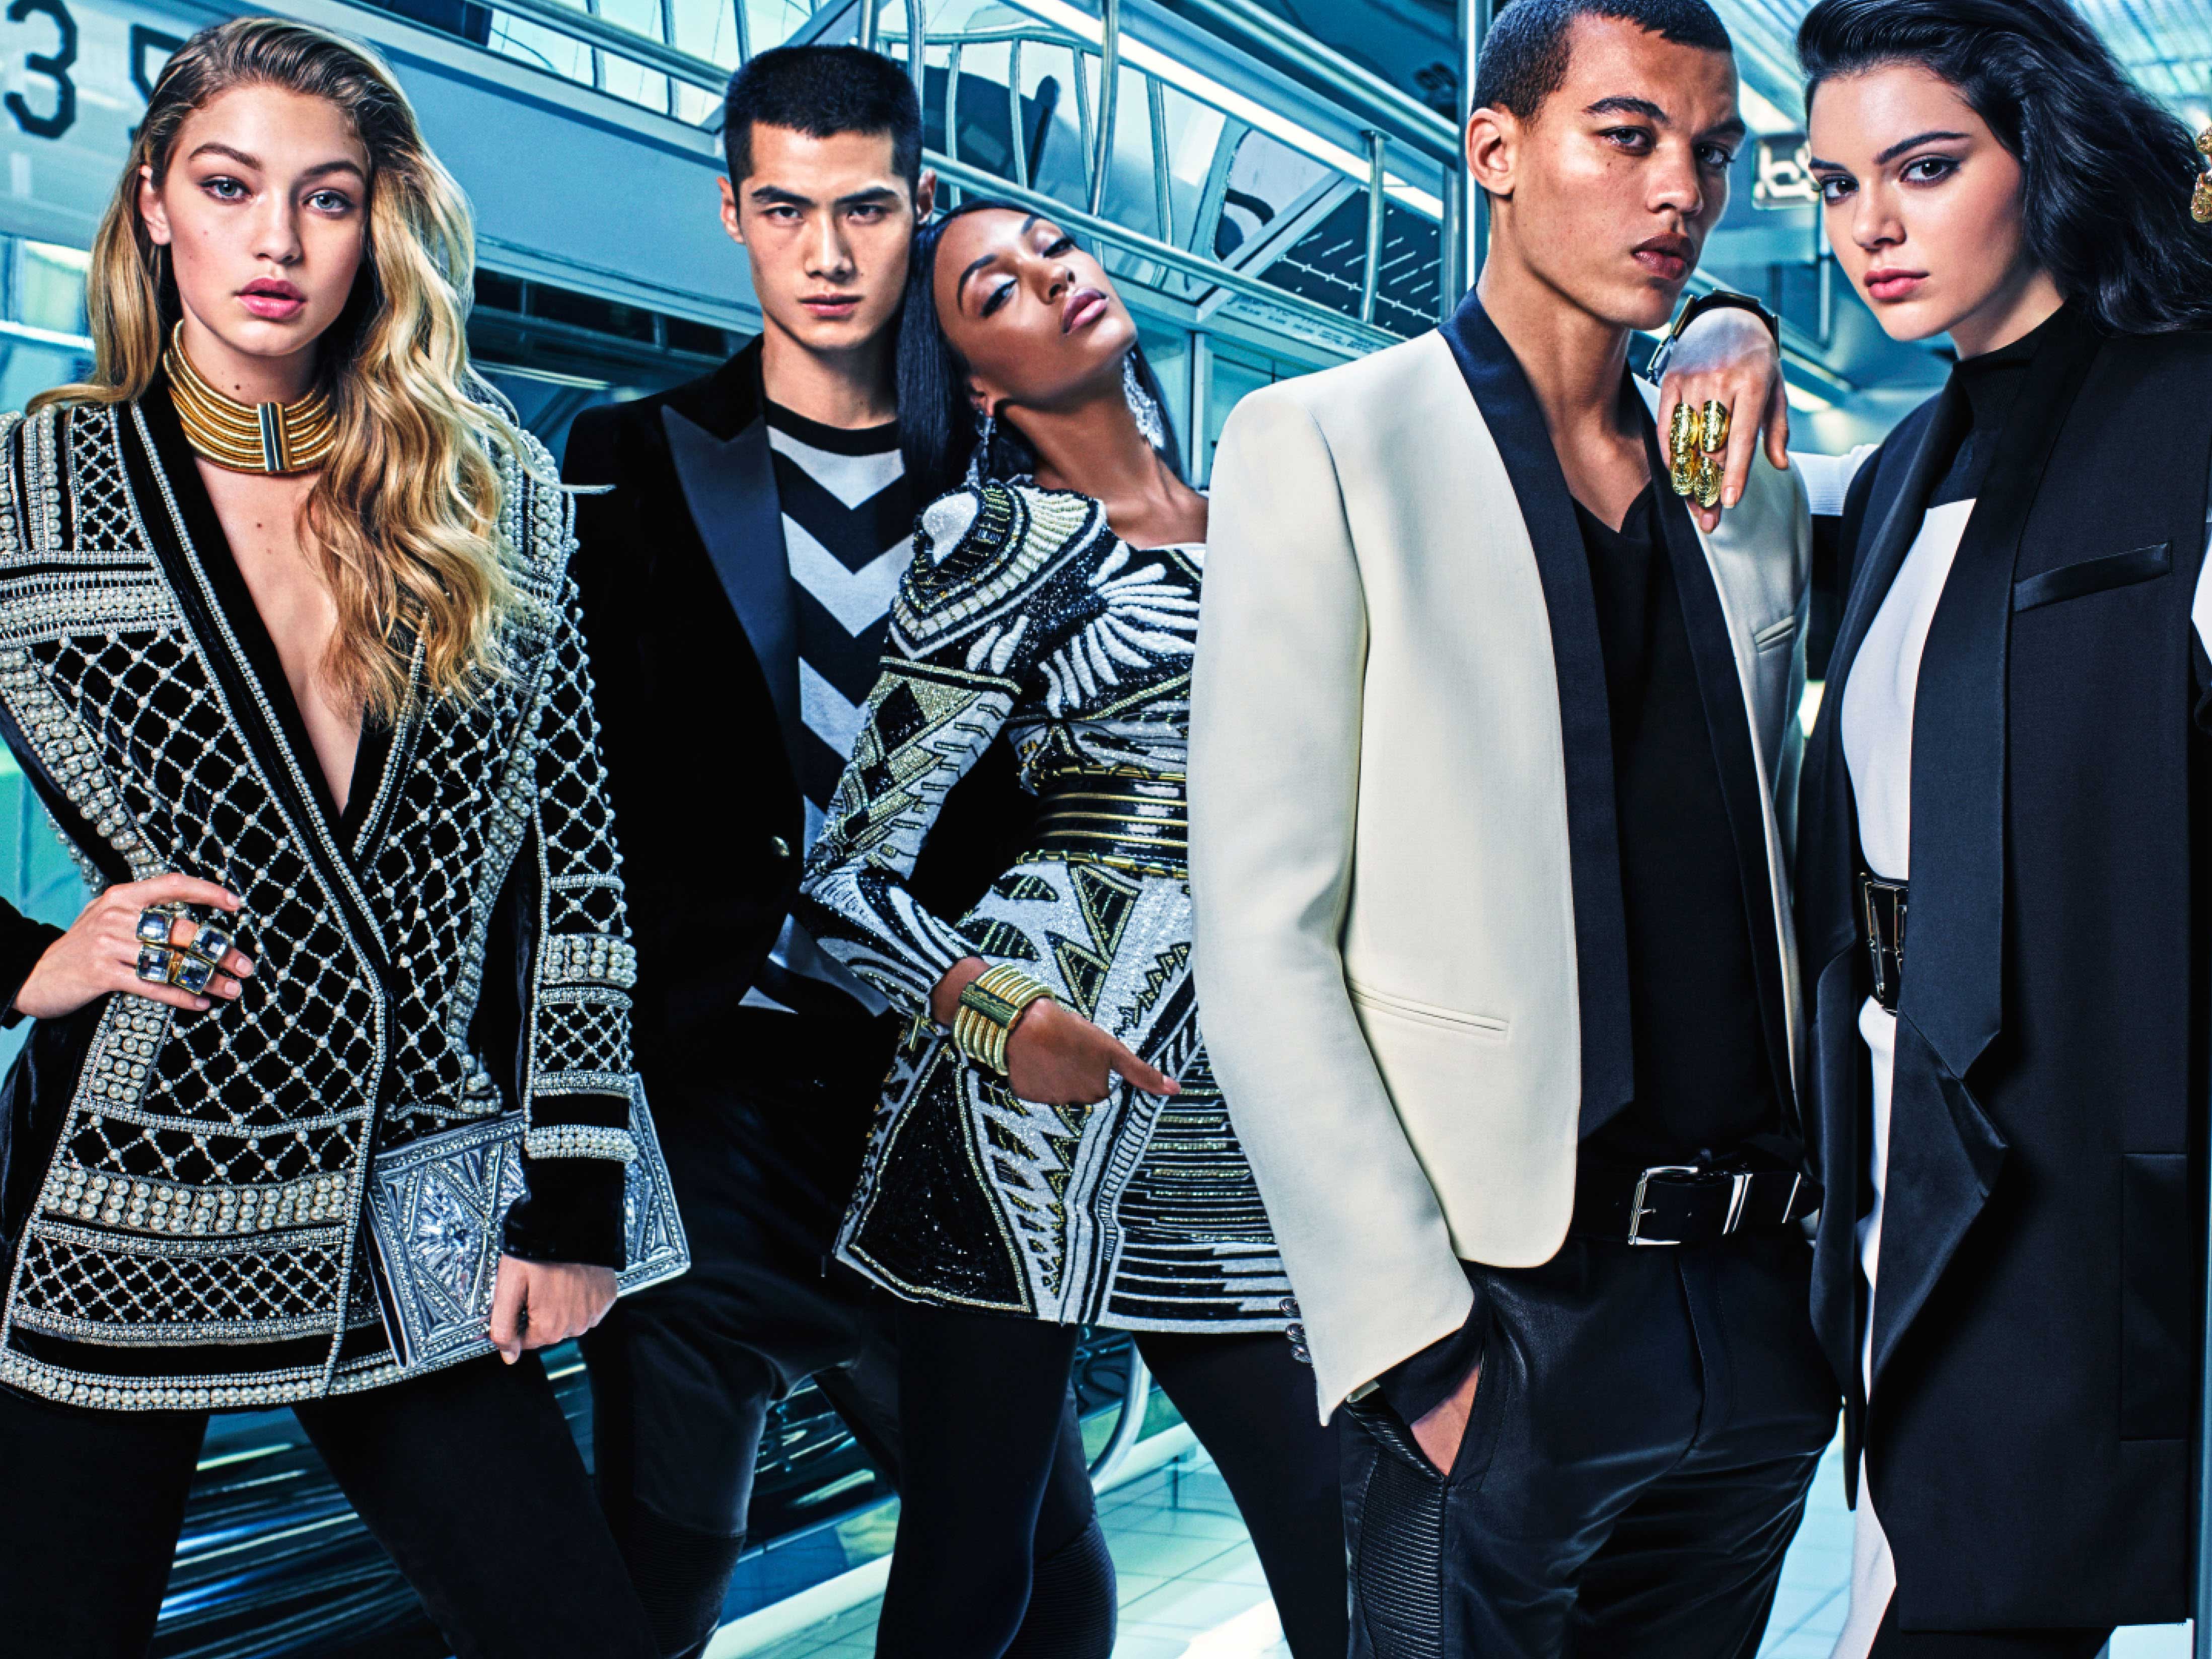 Balmain X H M Kendall Gigi And Jourdan Front The New Campaign The Independent The Independent